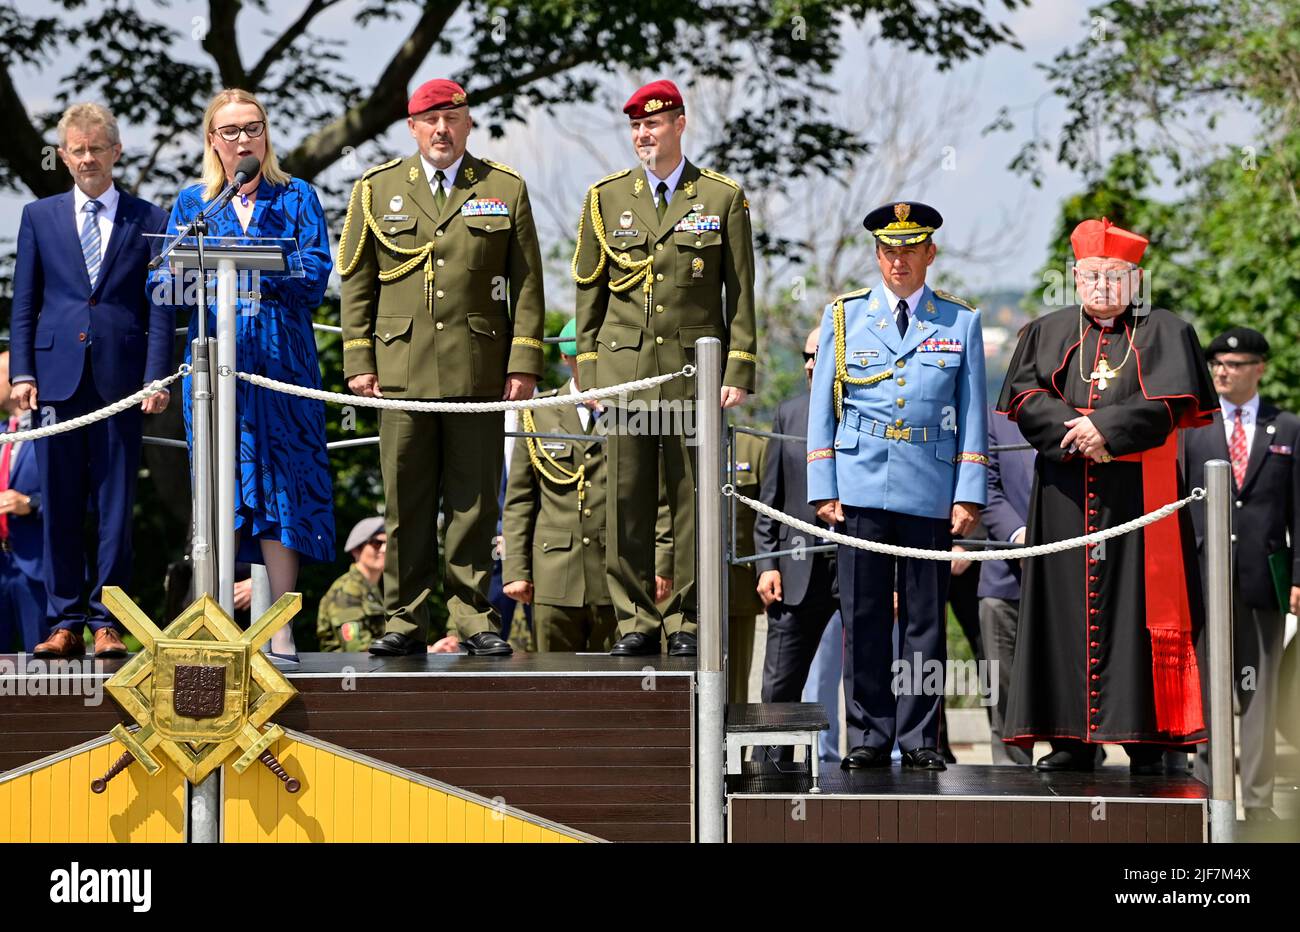 Prague, Czech Republic. 30th June, 2022. On the occasion of Armed Forces Day the Chief of Staff Ales Opata, 3rd from left, passes the post to Brigadier General Karel Rehka, 4th from left, at Vitkov National Memorial, Prague, Czech Republic, on June 30, 2022. From the left are seen Senate Chairman Milos Vystrcil and Defence Minister Jana Cernochova, on the right side is seen cardinal Dominik Duka. Credit: Roman Vondrous/CTK Photo/Alamy Live News Stock Photo